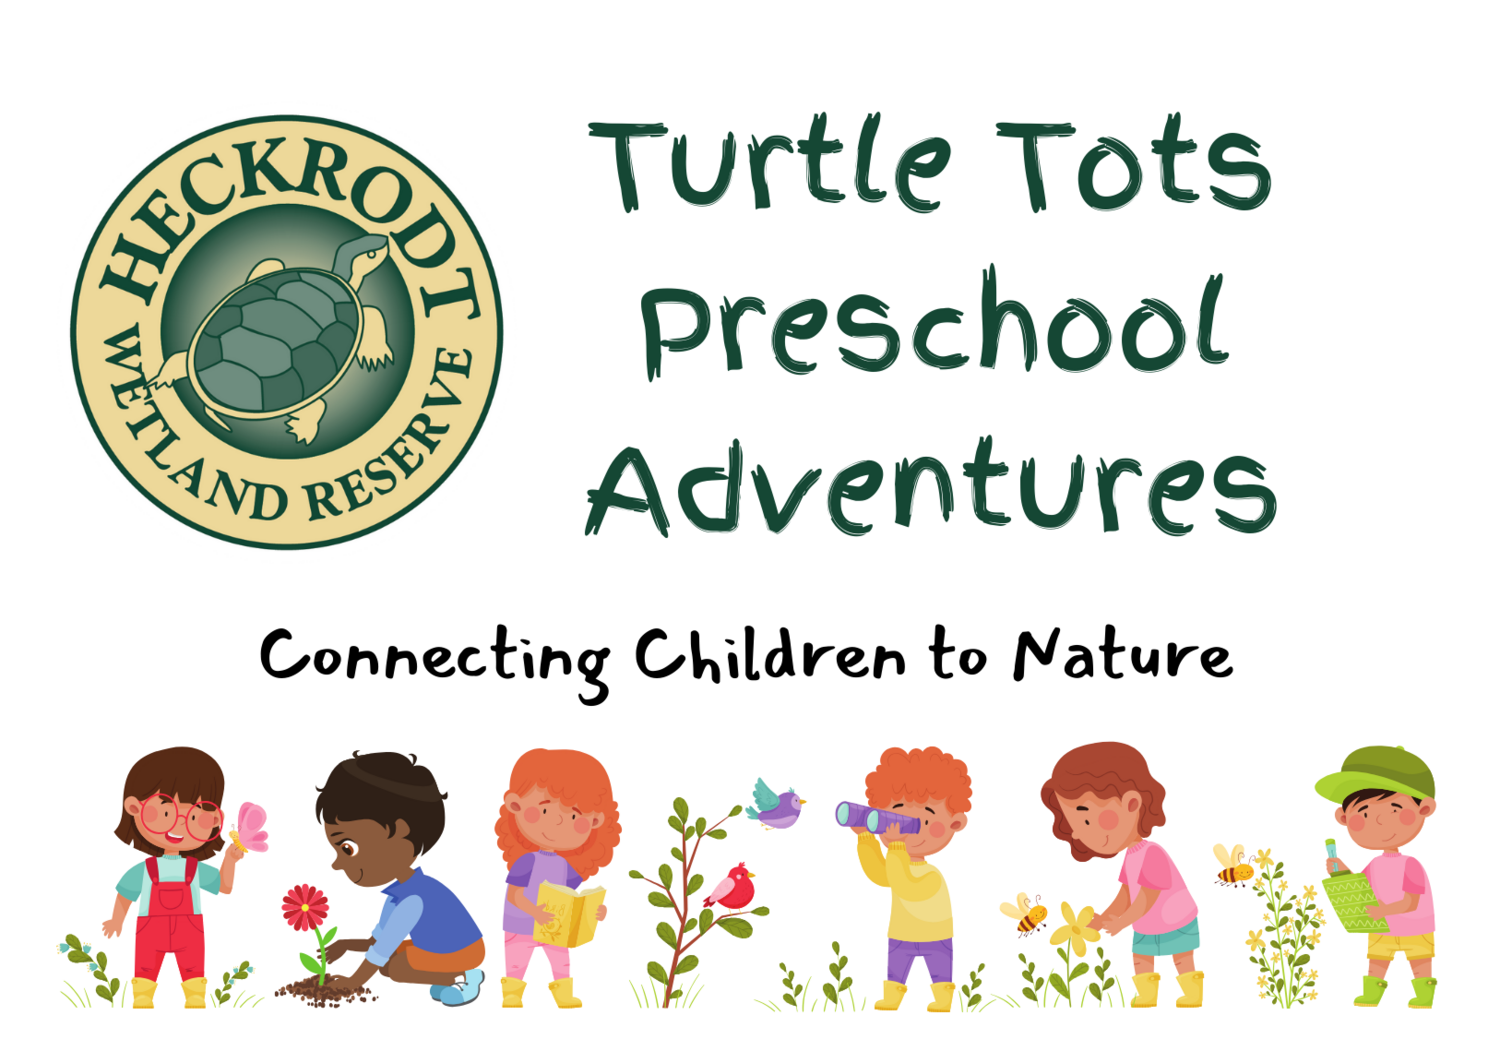 Turtle Tots: Wild Birds in the Water Thursday, August 8th 9:30-10:30 am